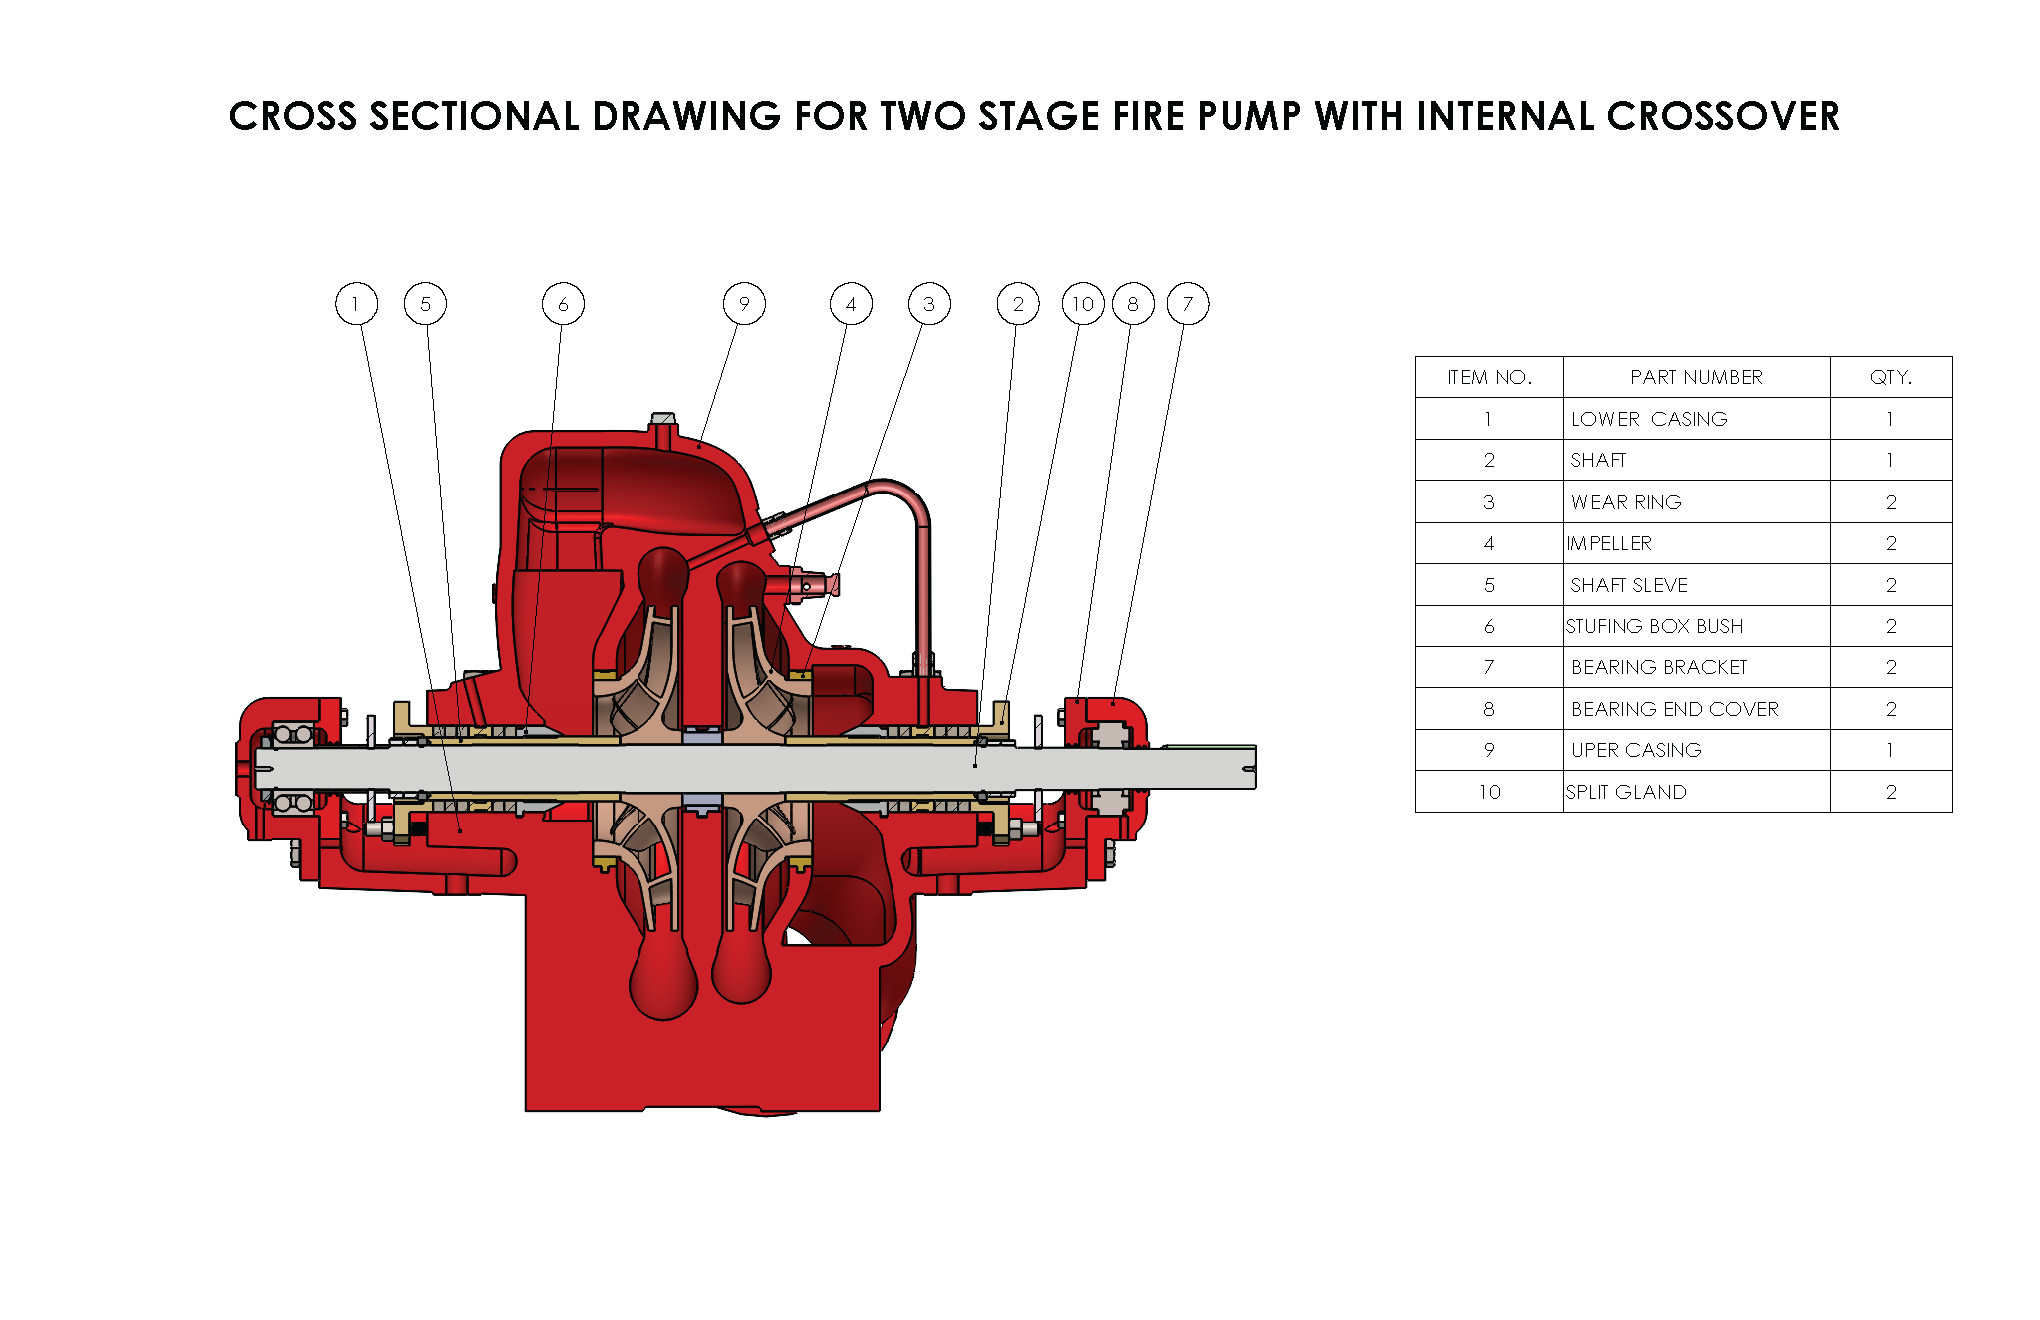 Cross Sectional Drawing For Two Stage Fire Pump With Internal Crossover